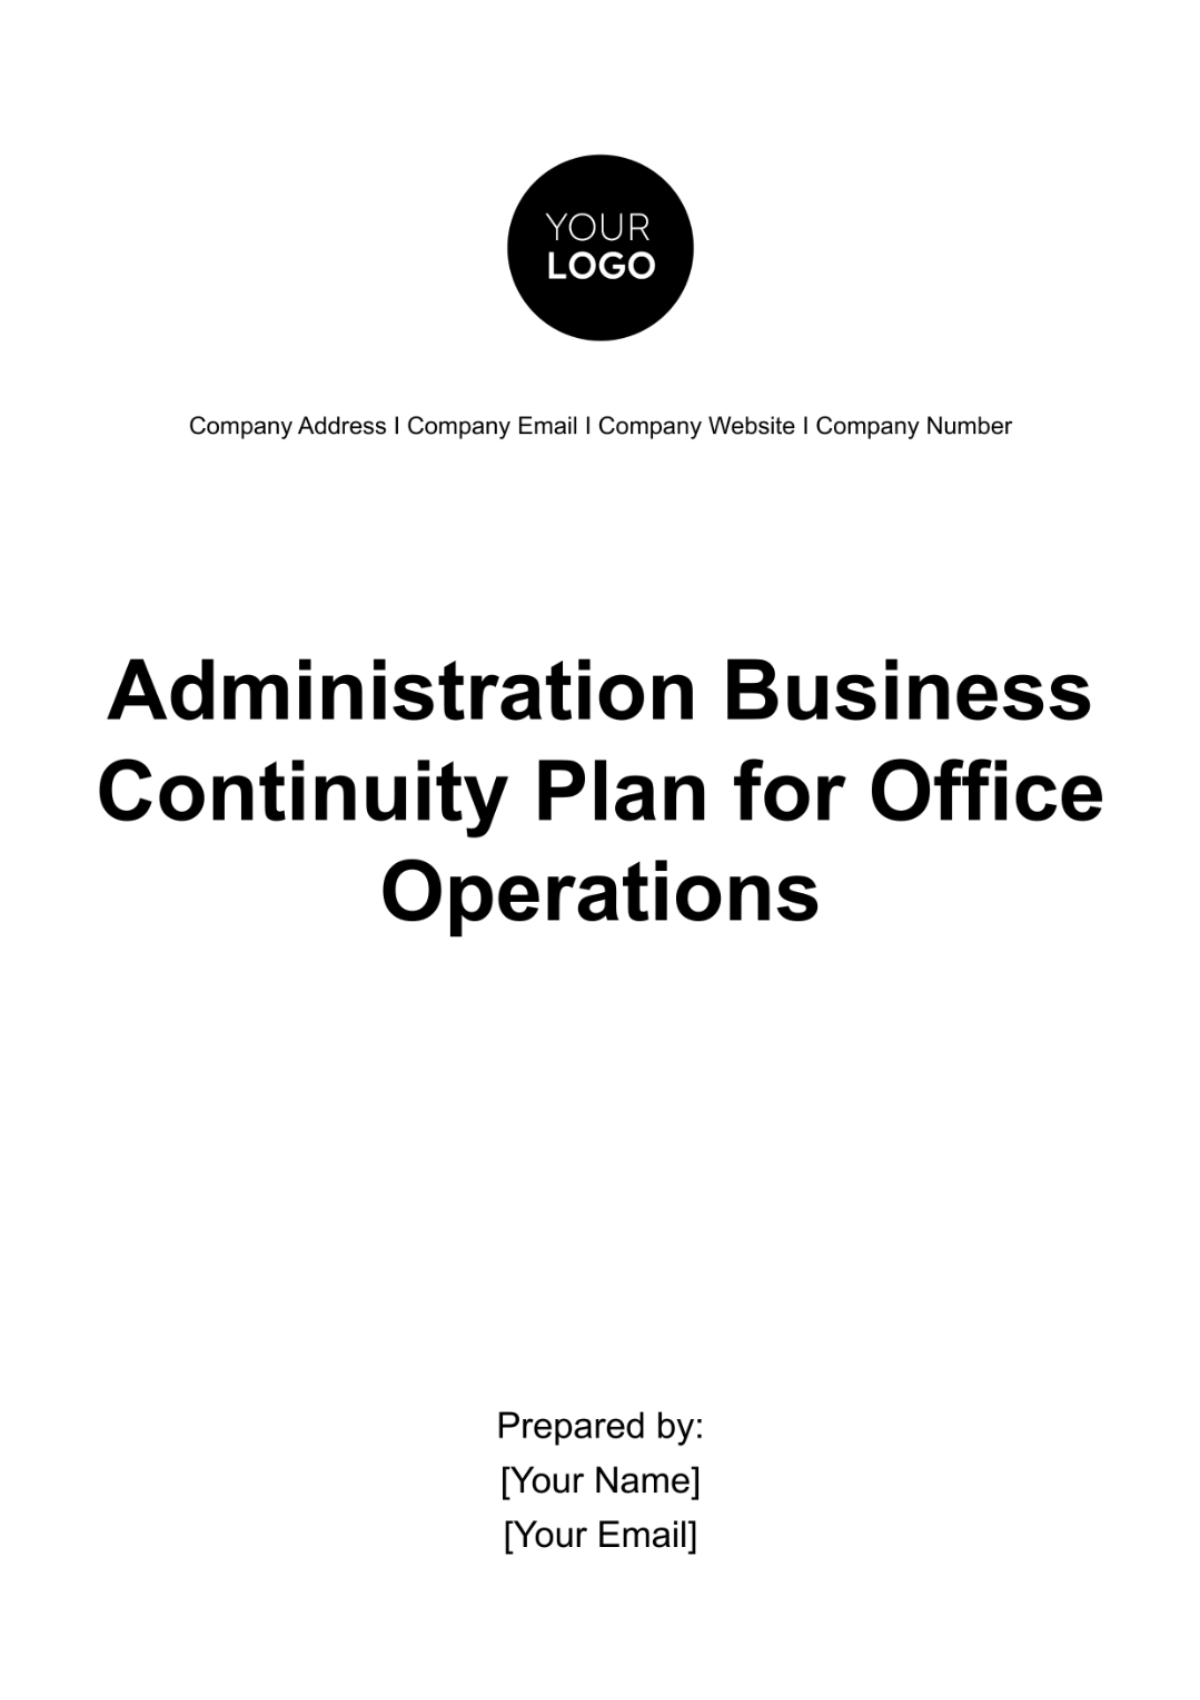 Free Administration Business Continuity Plan for Office Operations Template